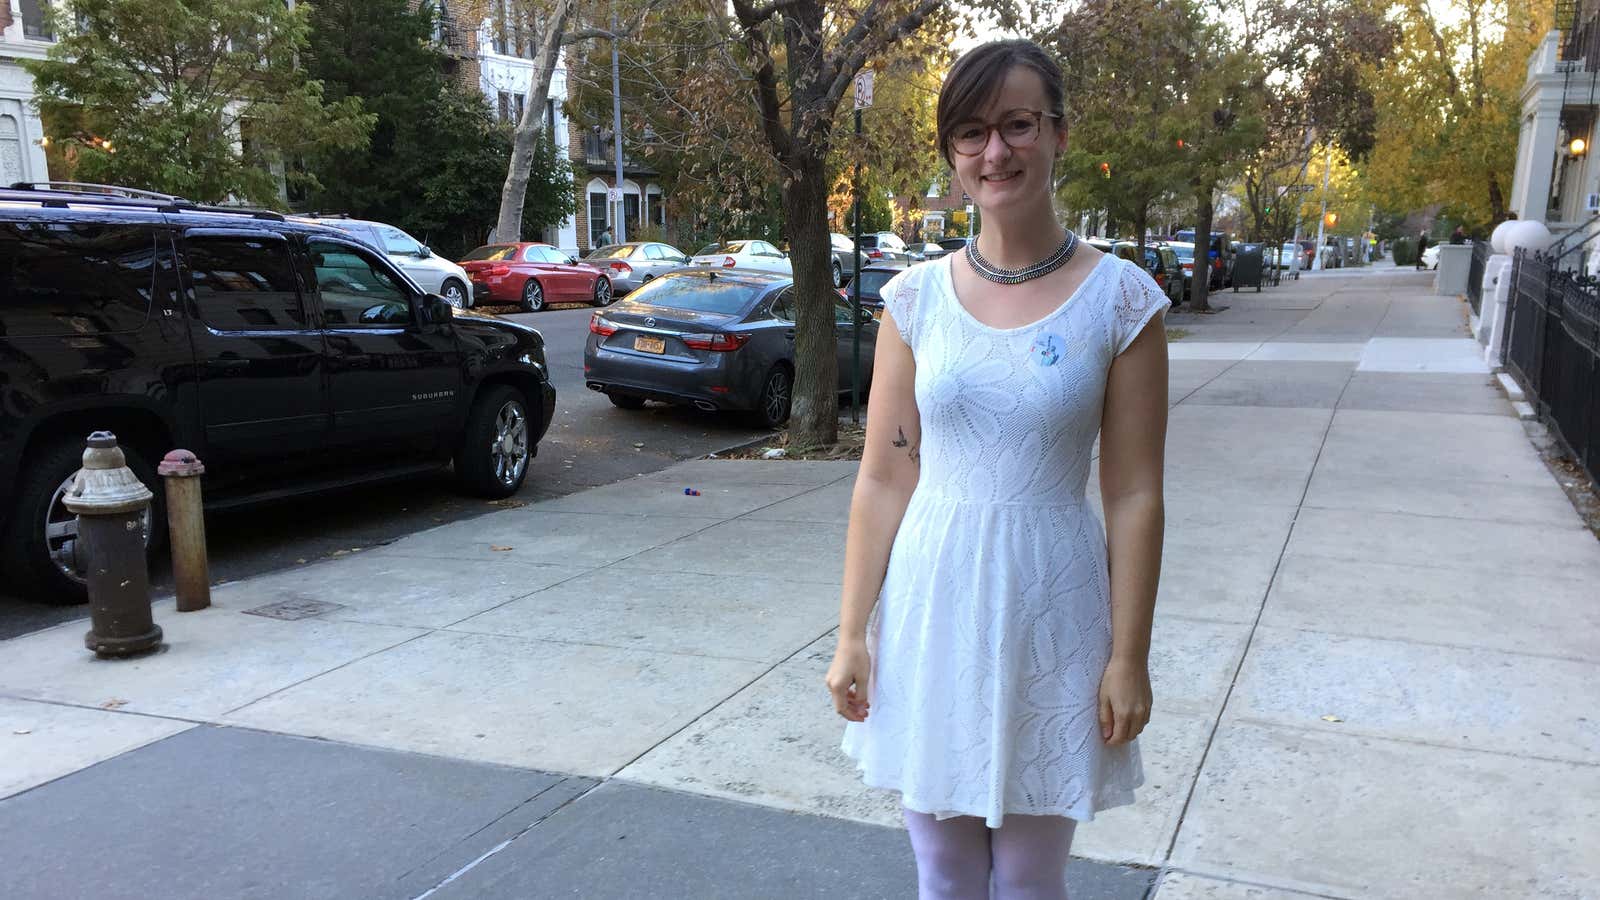 A woman in Brooklyn who voted for Hillary Clinton showing off the day’s big fashion trend: all white everything.